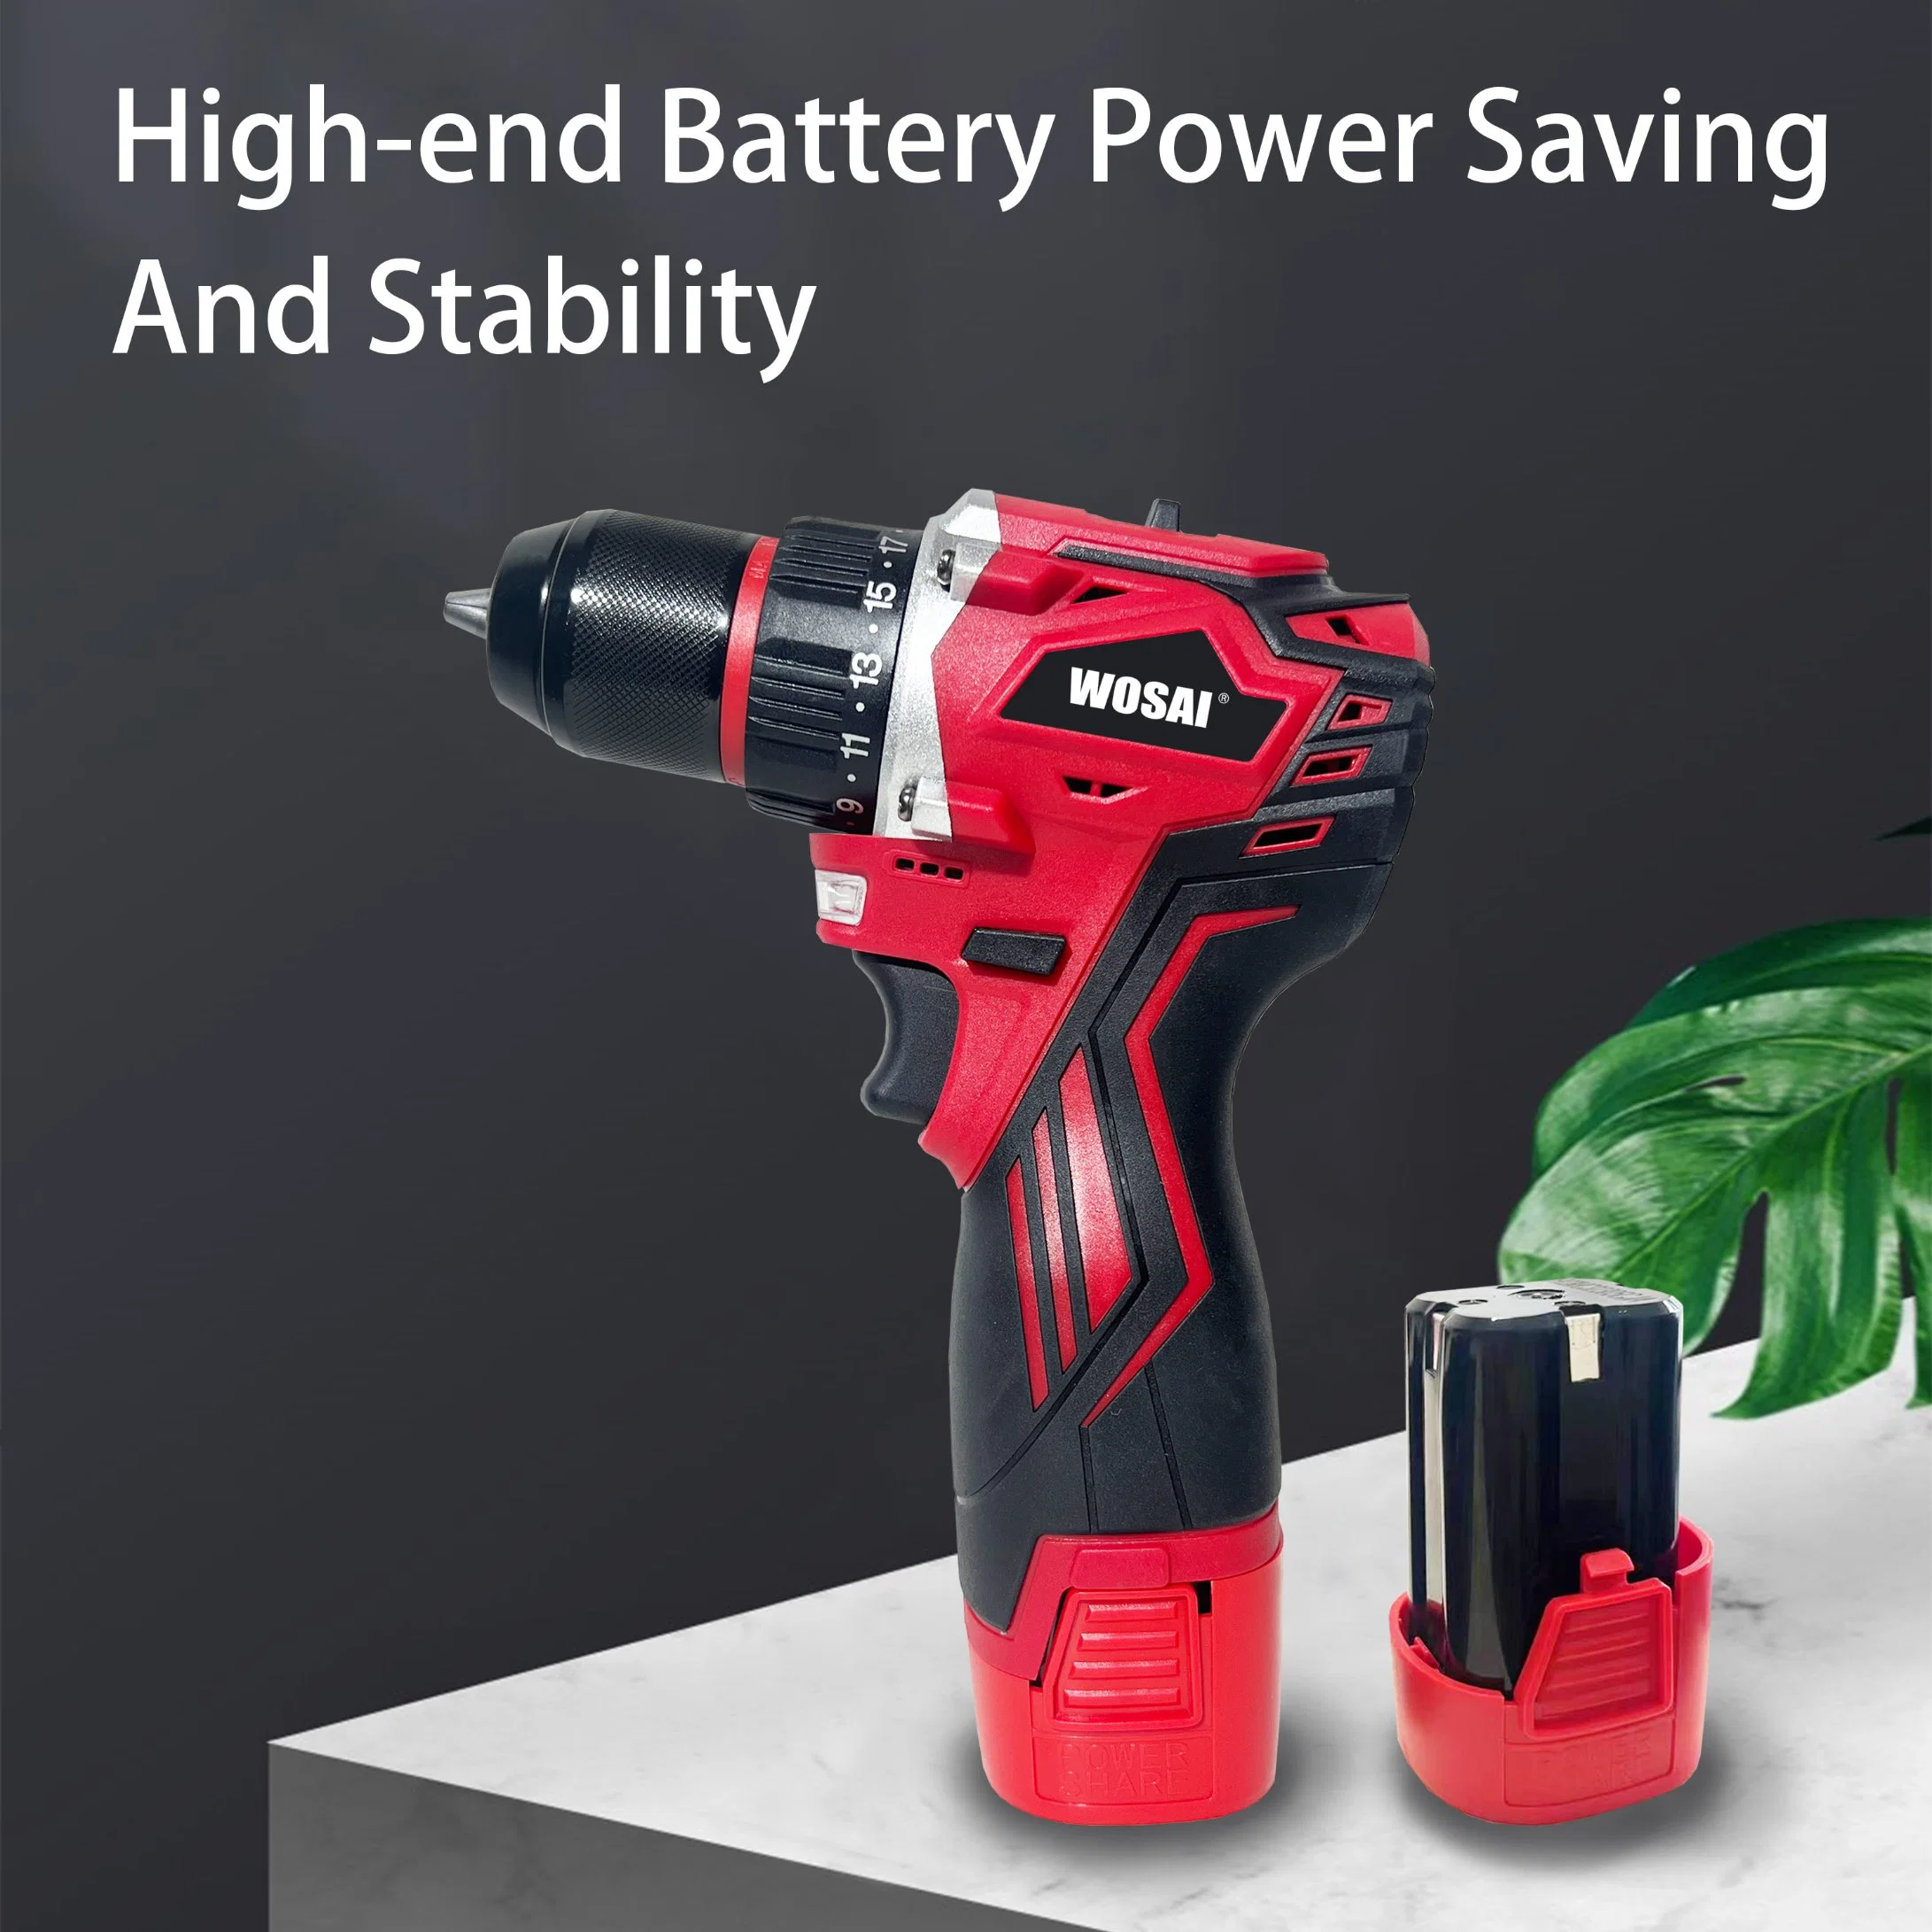 16V Brushless Battery Screwdriver HSS Drill Bit Auger Tools Hardware Power Drill Screw Drilling Machine